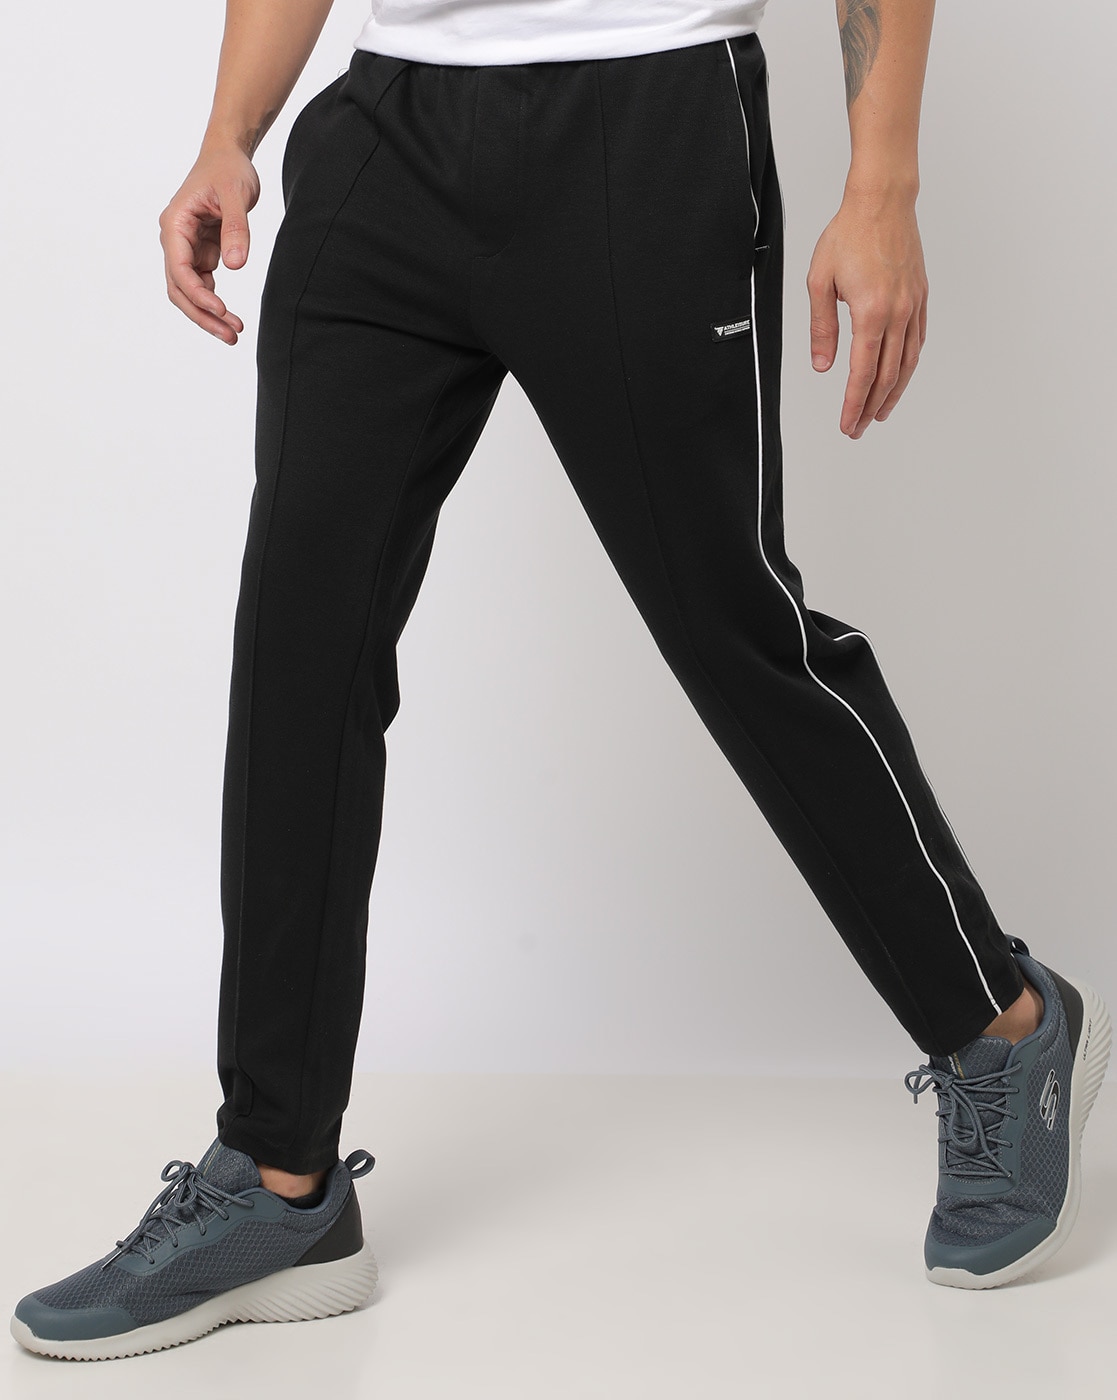 Best TRACK PANTSJOGGERS for Men on AJIO  Fashion Haul Review 2023  ONE  CHANCE  YouTube